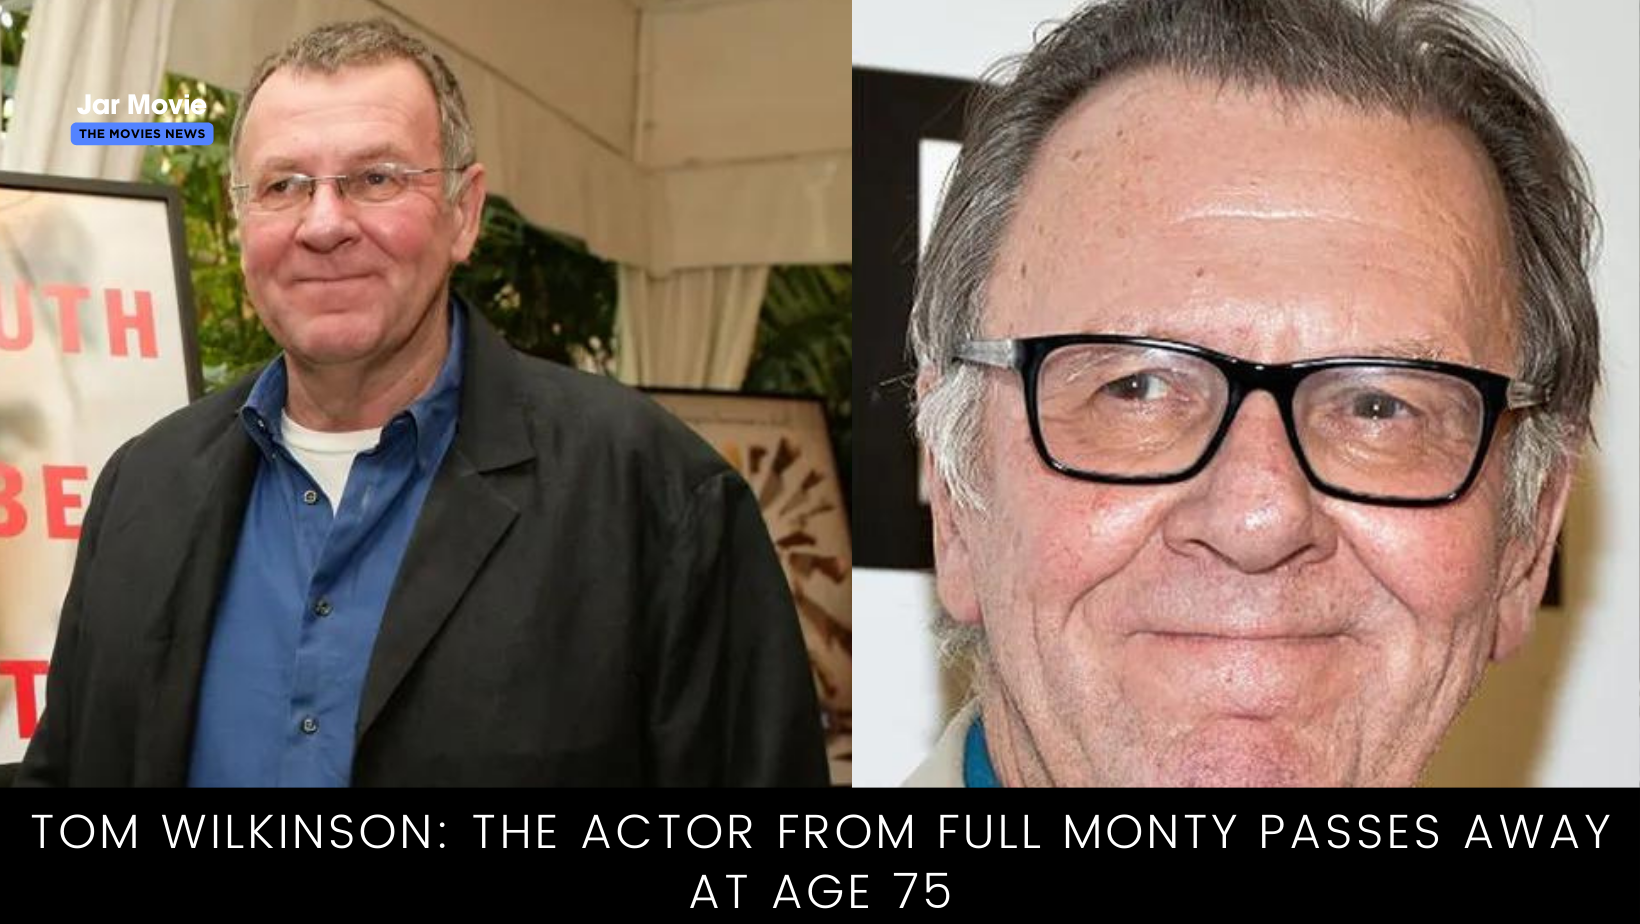 Tom Wilkinson: The actor from Full Monty passes away at age 75